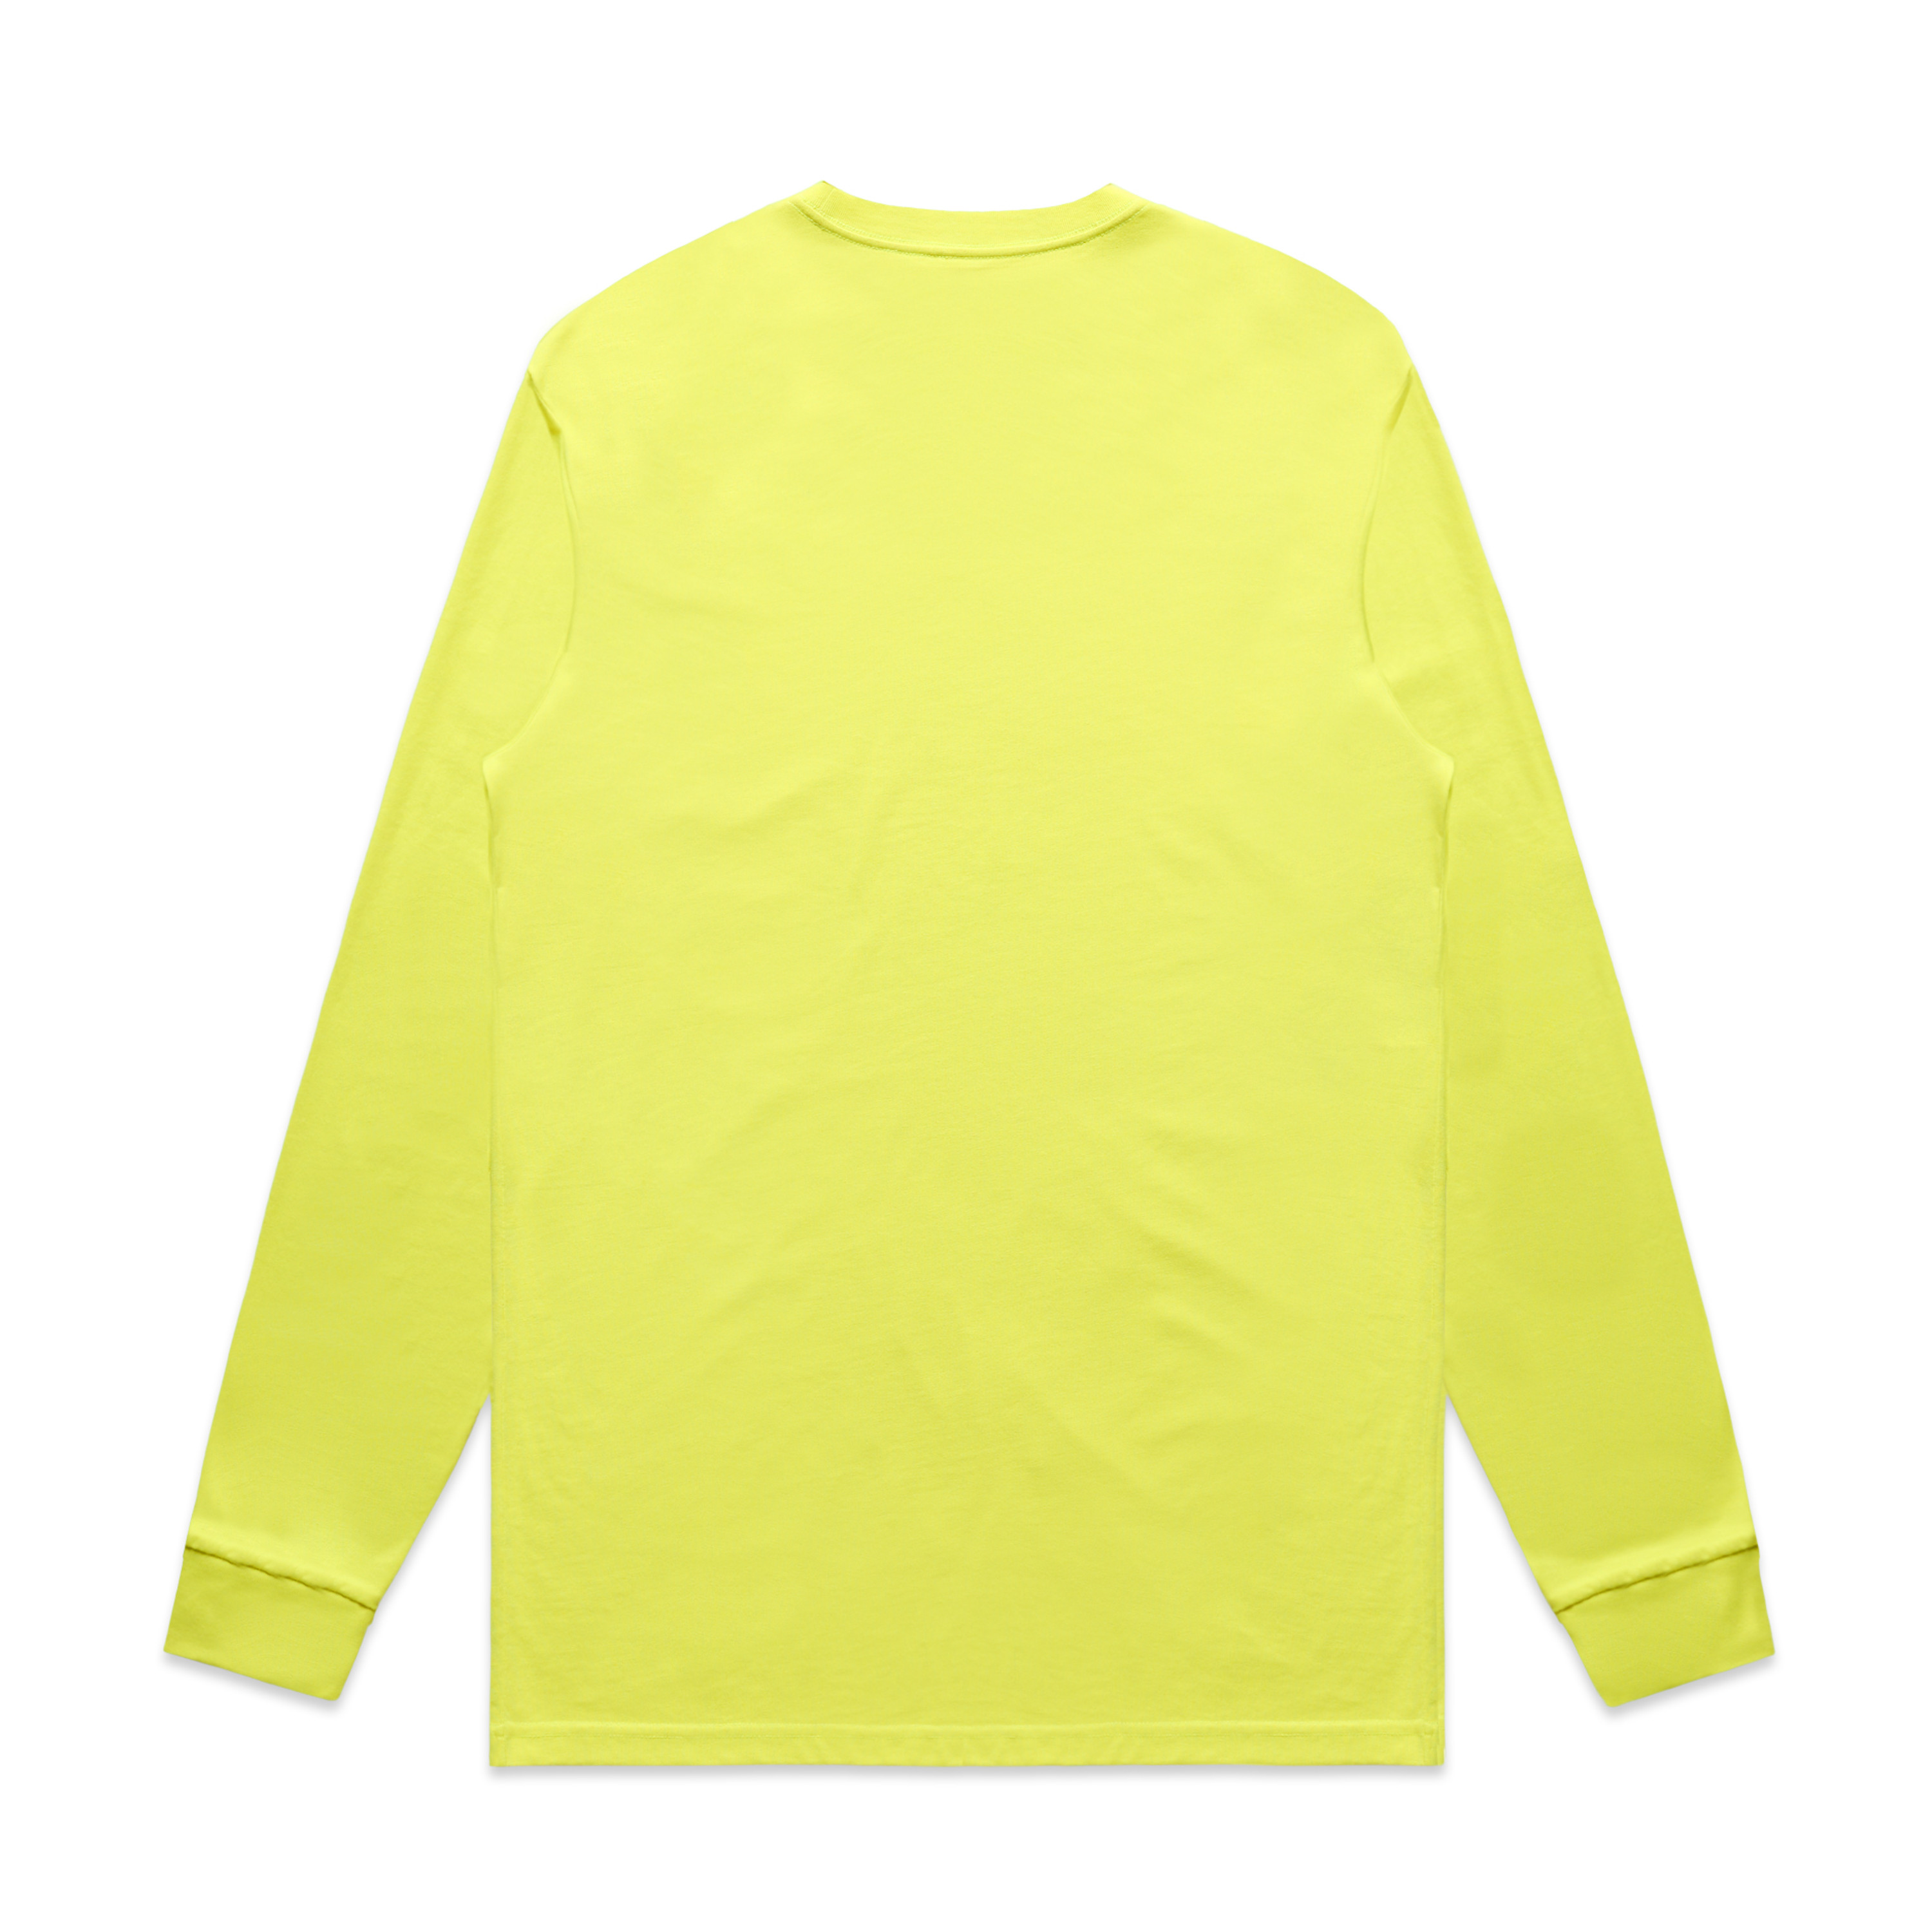 SAFETY YELLOW - BACK